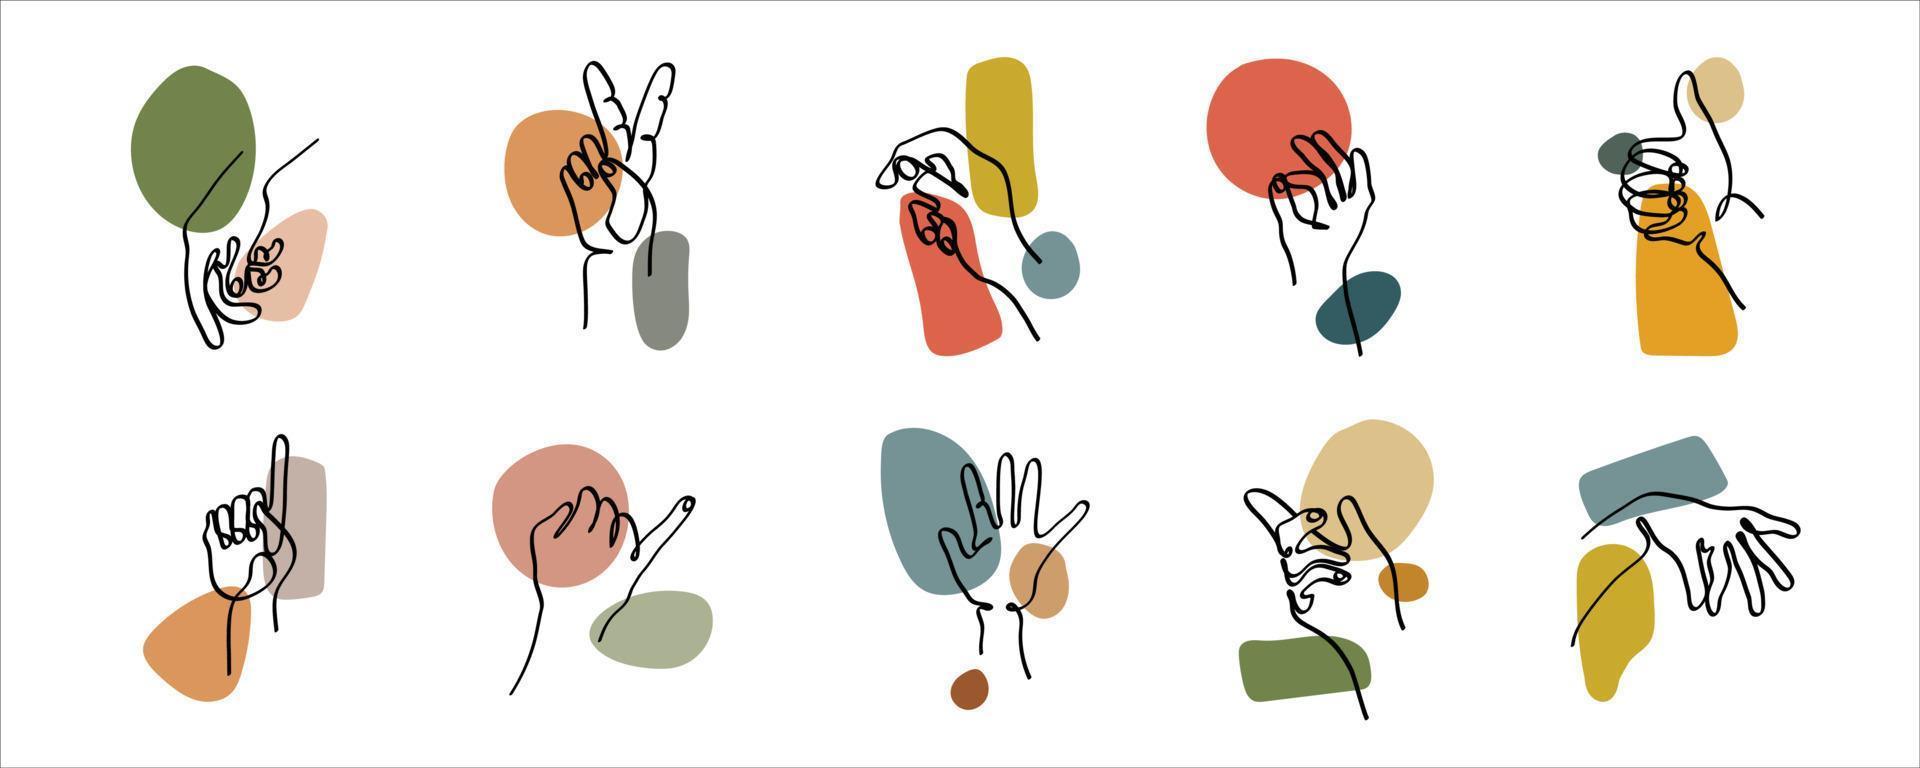 set of hand gestures is created with colored abstract shapes. simple hand drawn illustrations for wall art decoration and print. collection of gestures for symbols and communication vector